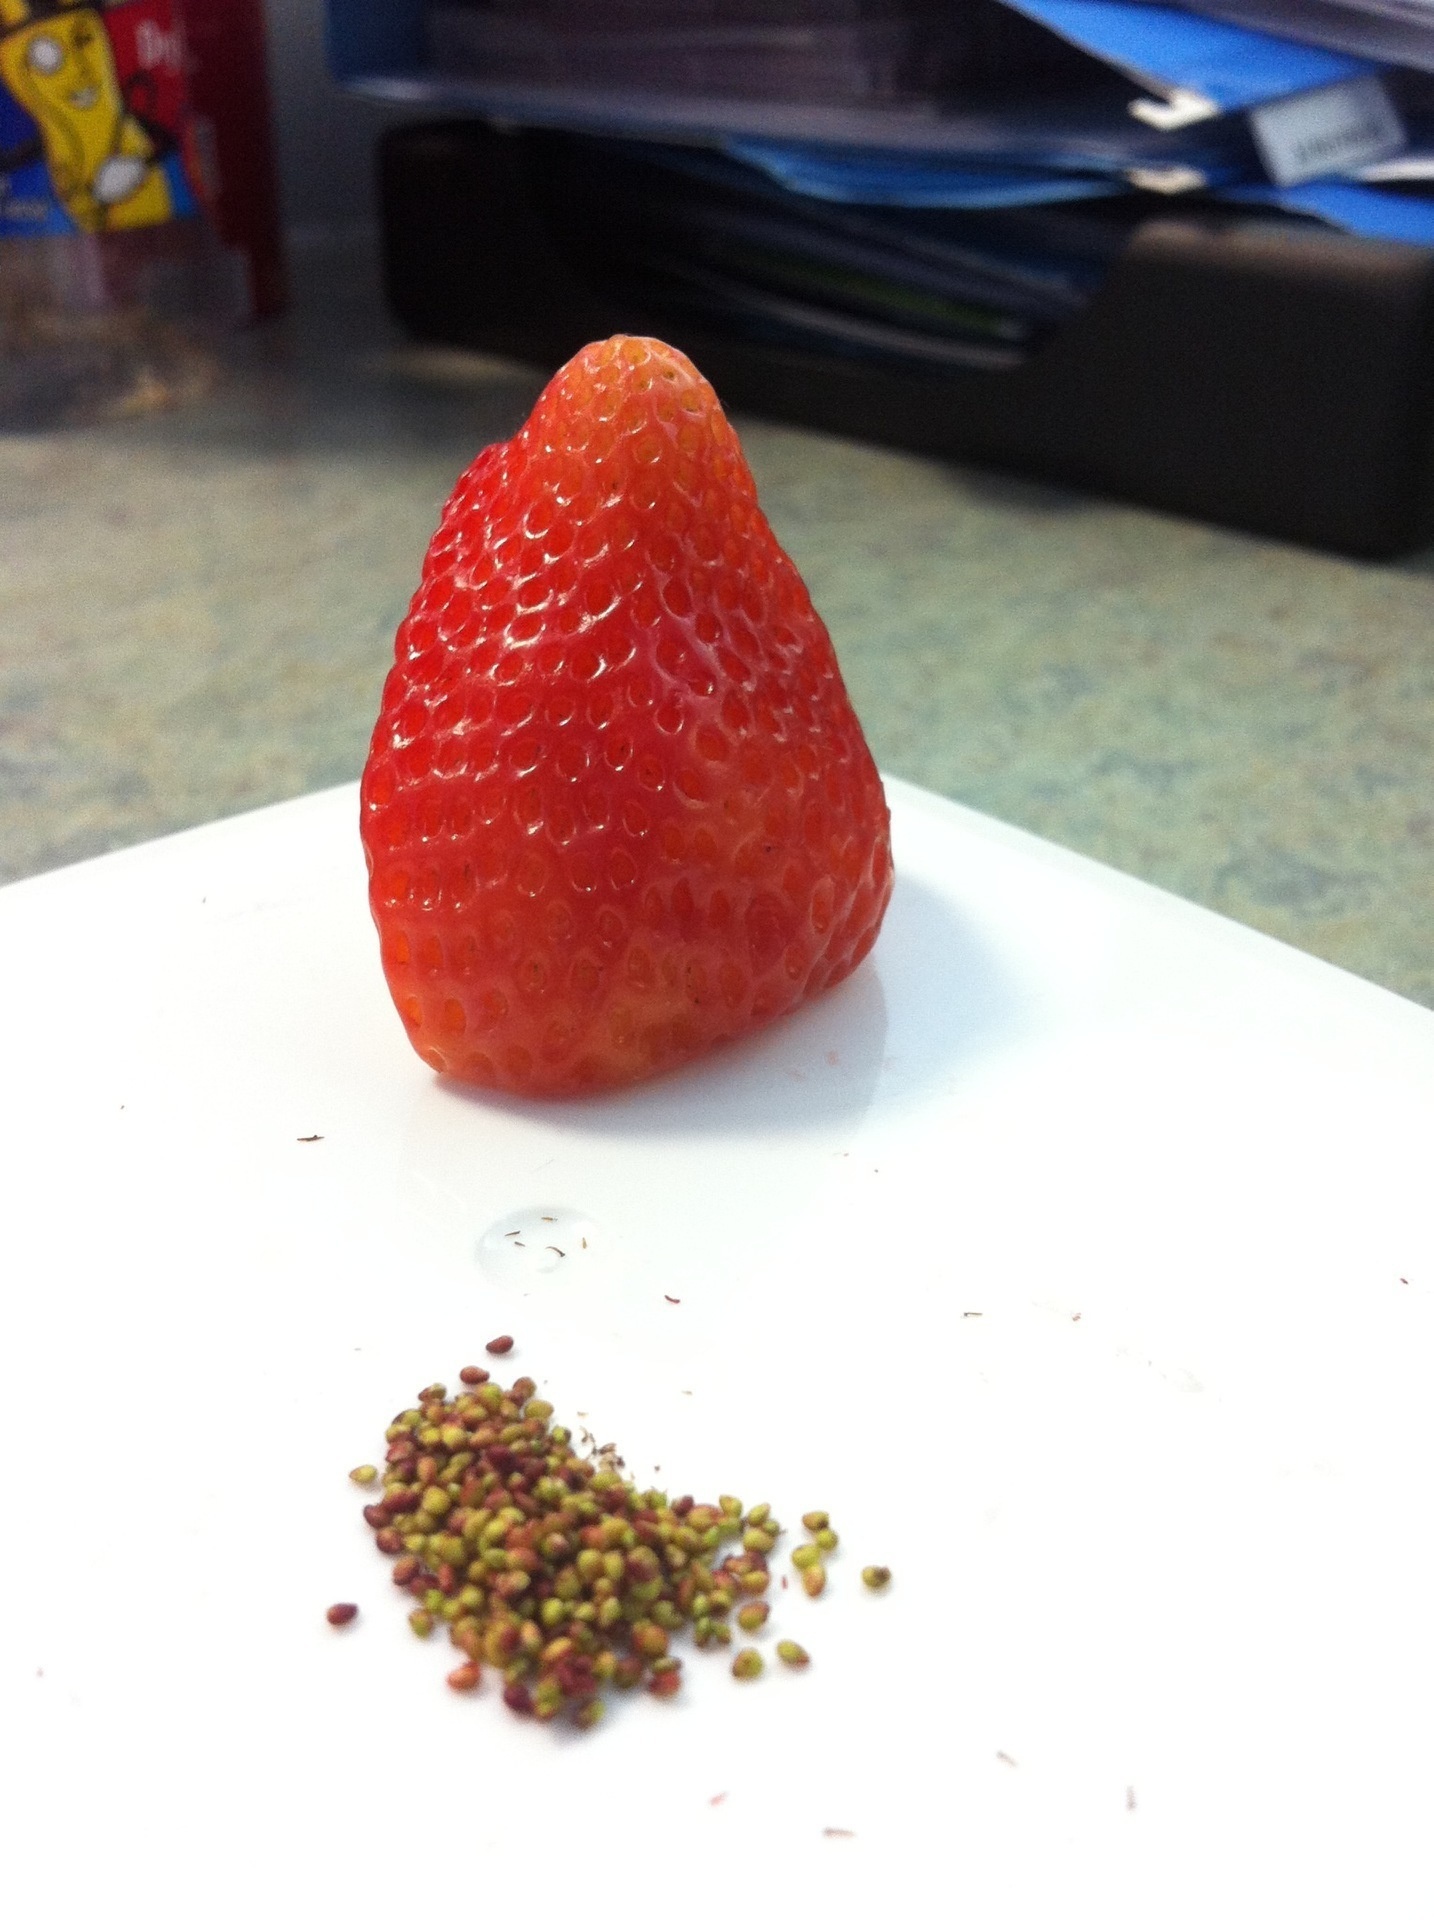 Strawberry, please. Hold the seeds.